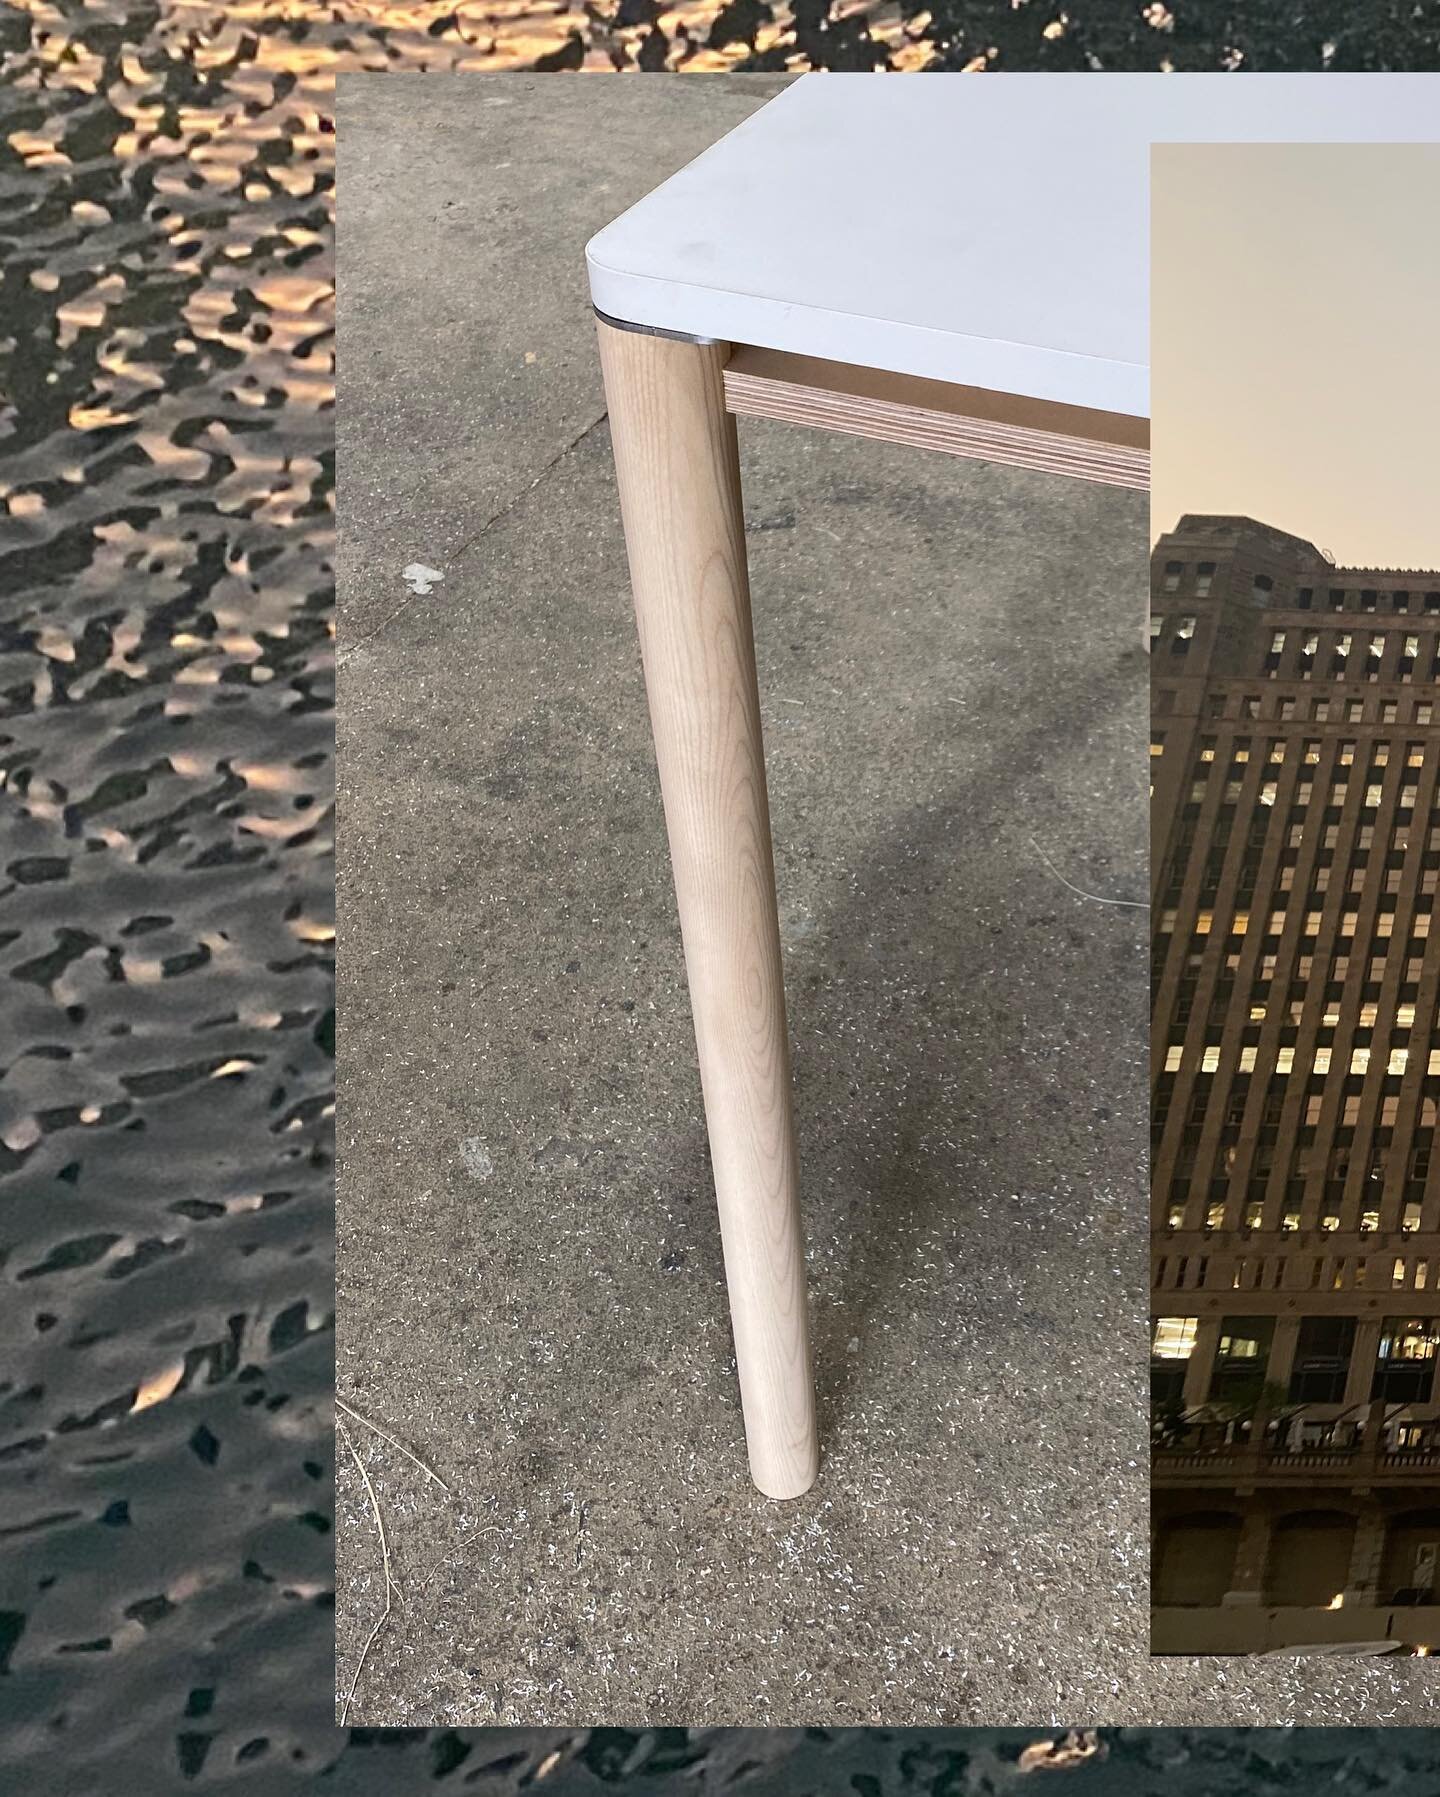 We are so excited about the conversations, new ideas, and energy at #neocon2022. Thread has new things in the works with @makr_furniture including an expansion of the |MOMENT| line. Stay tuned!